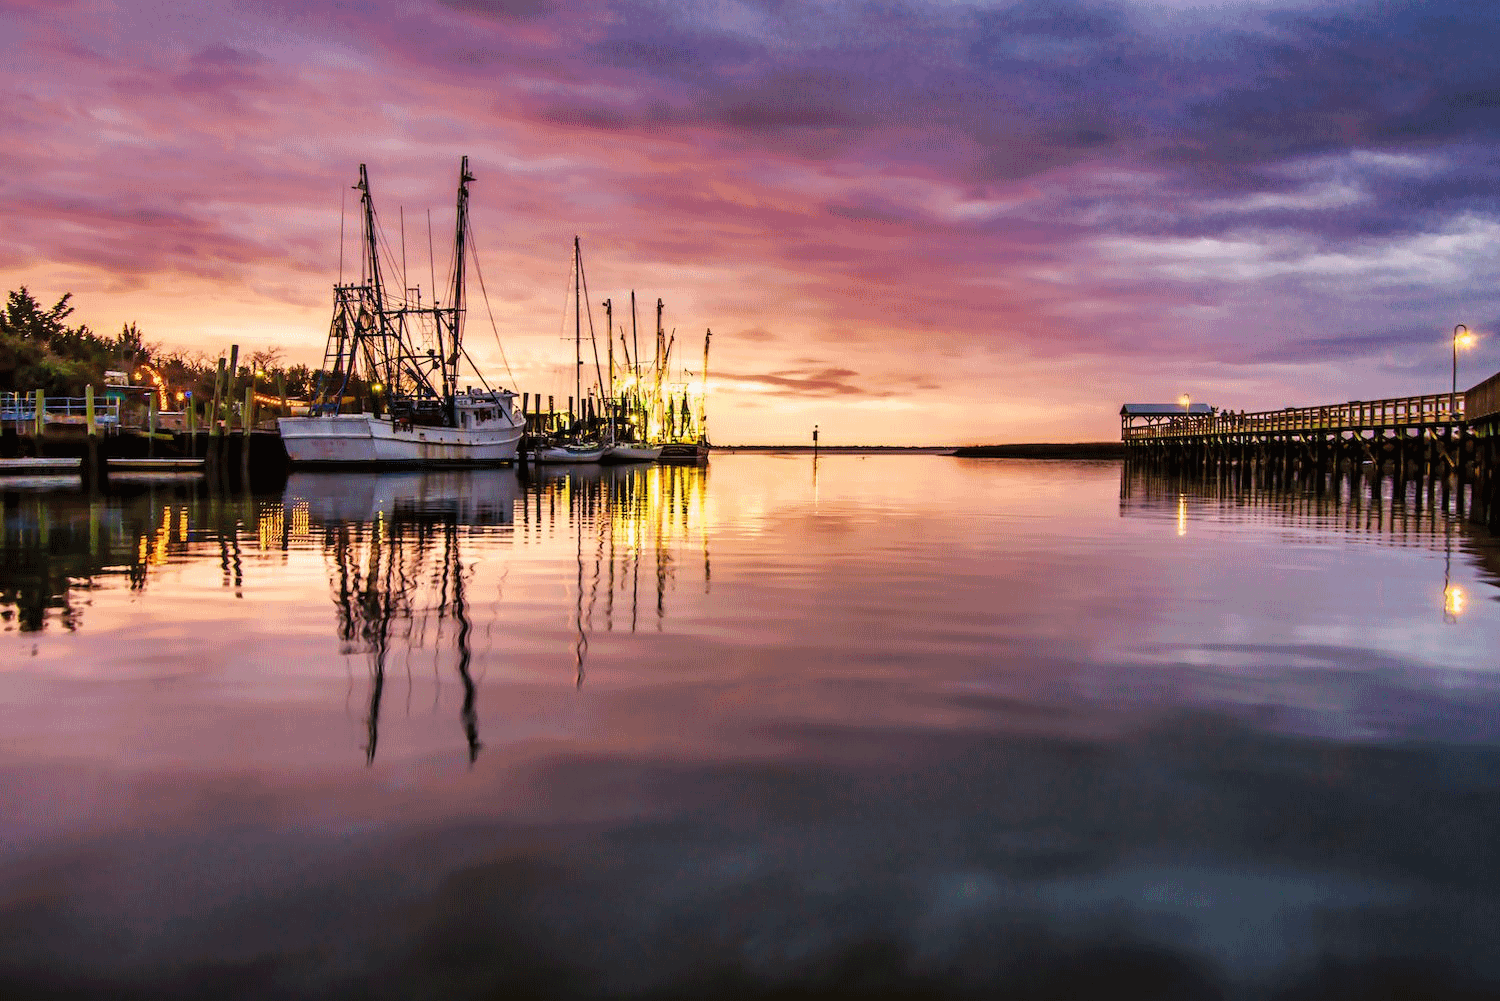 inner-coastal-channel-at-sunset-with-fishing-boats